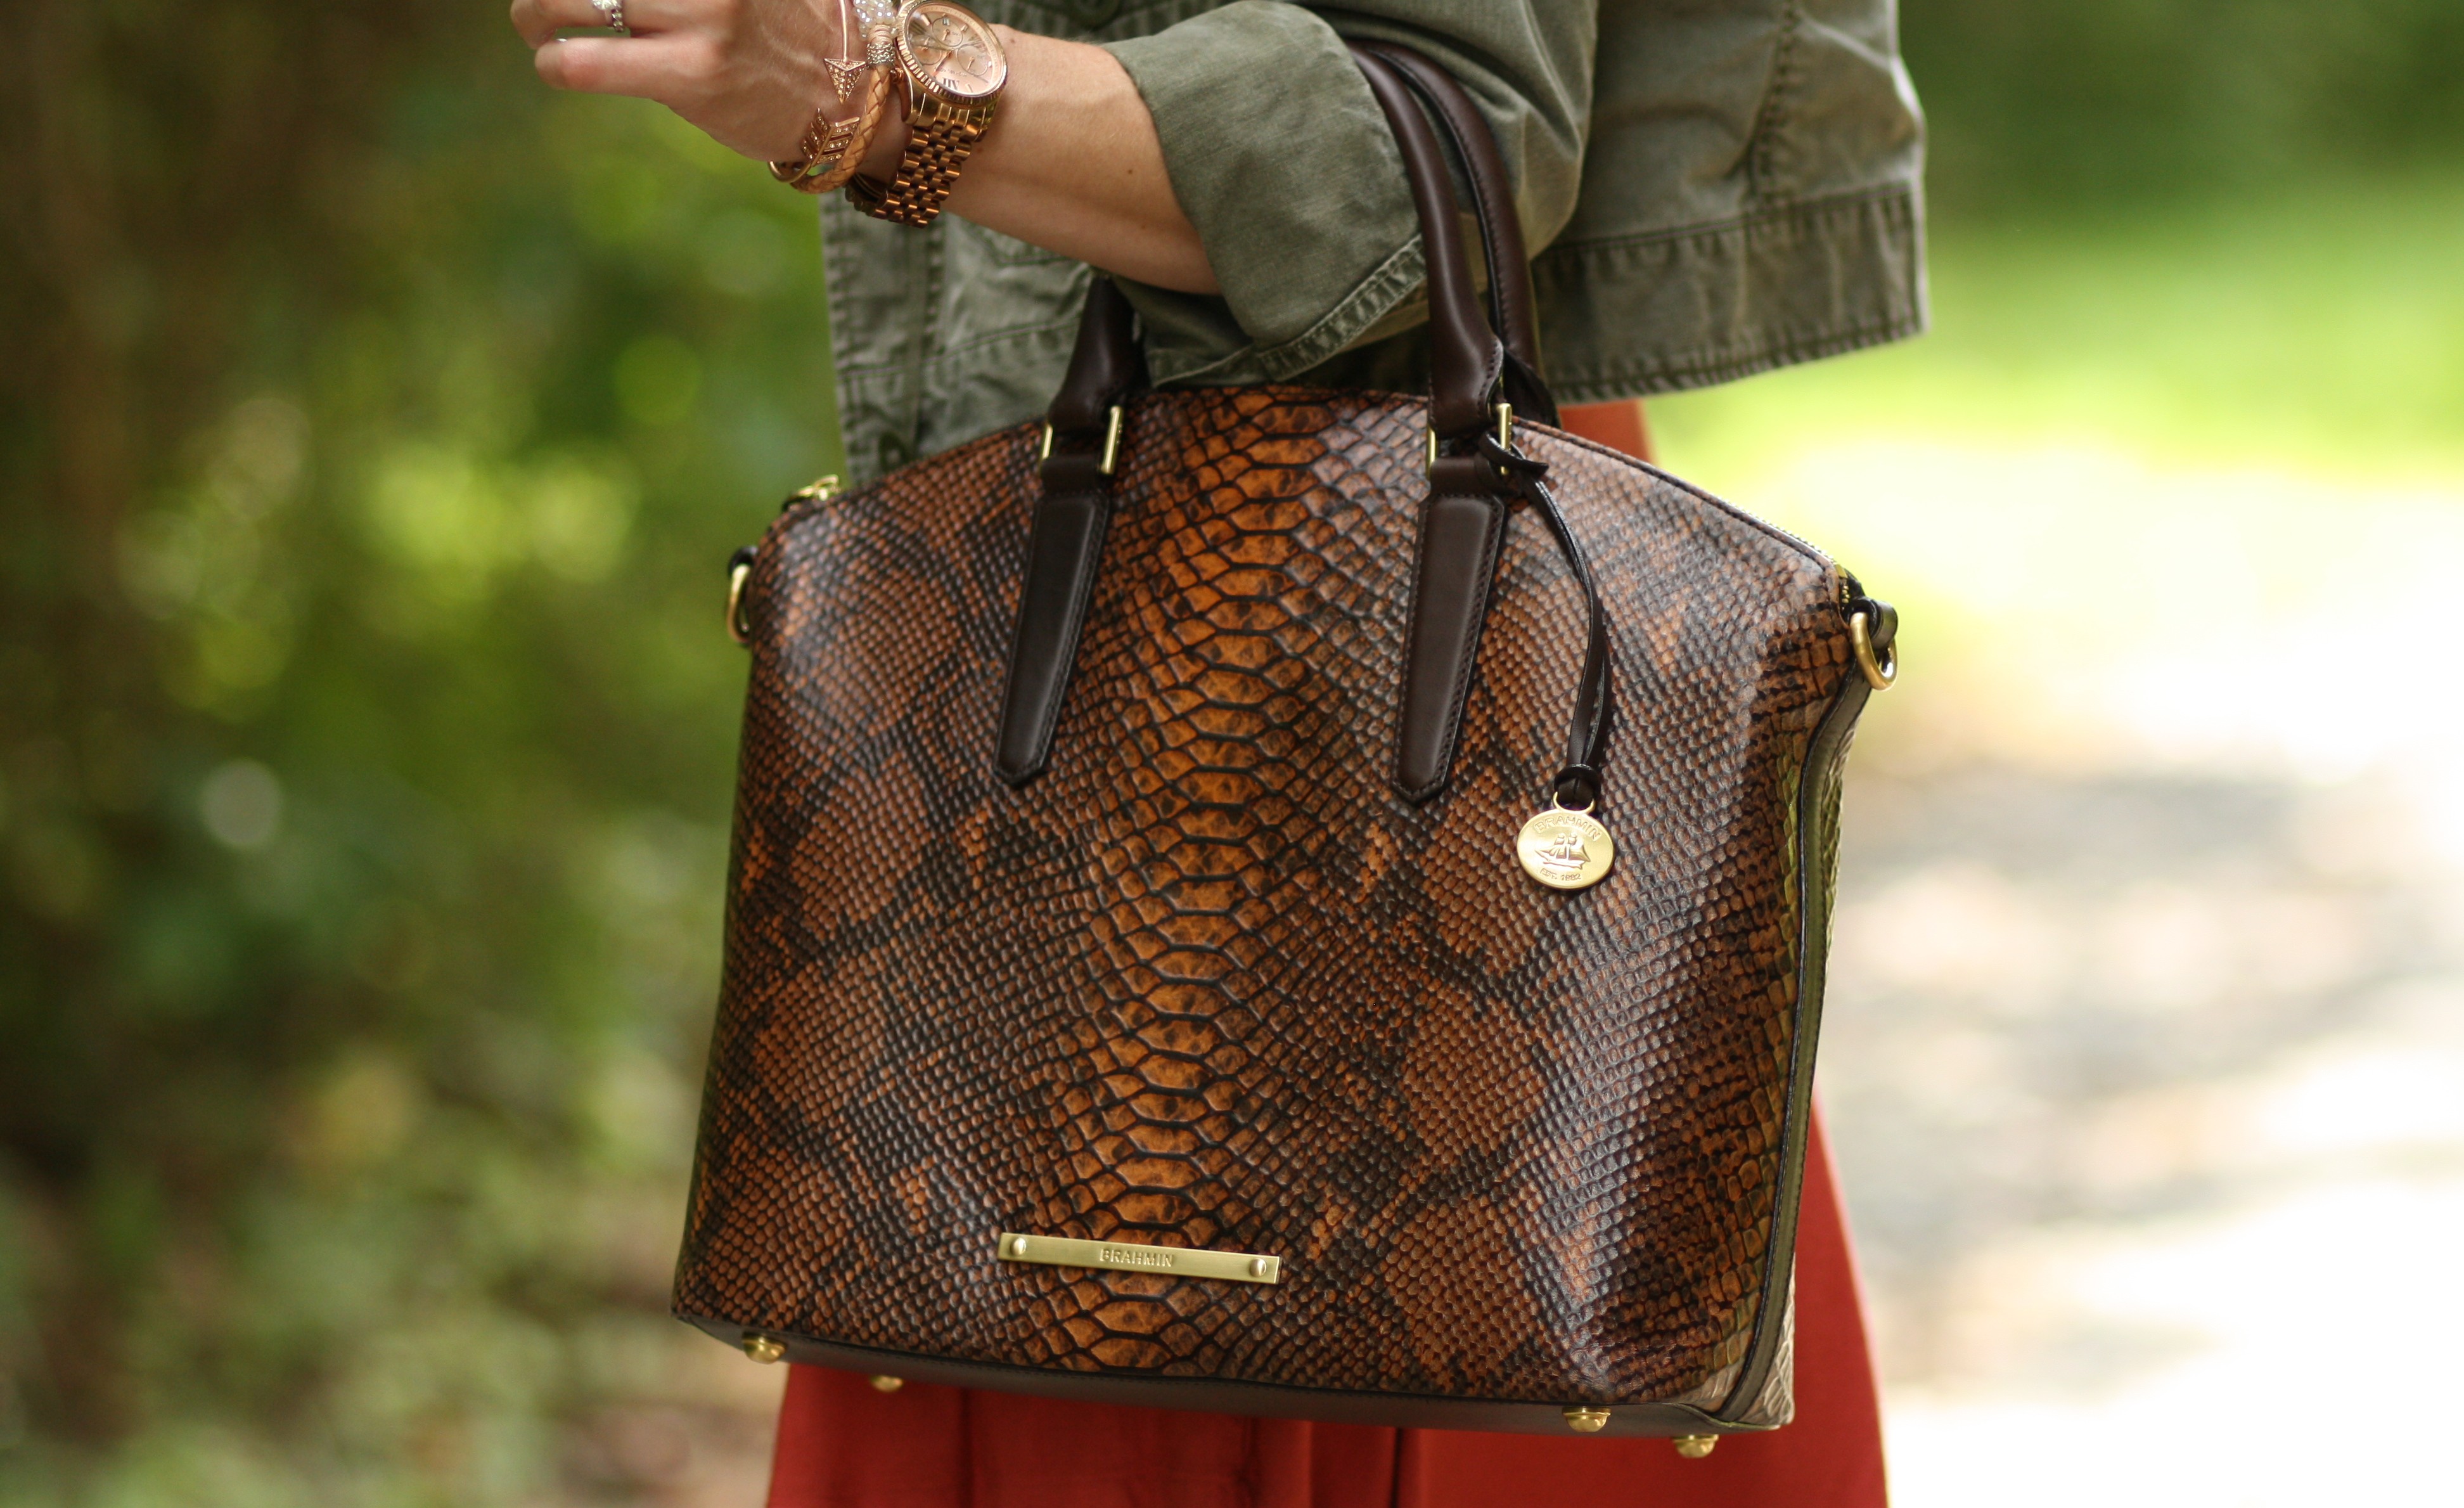 Brahmin Handbags - Fall outfit goals 🍂 by the @therusticlife! Carrying the Large  Duxbury Satchel in Pecan.